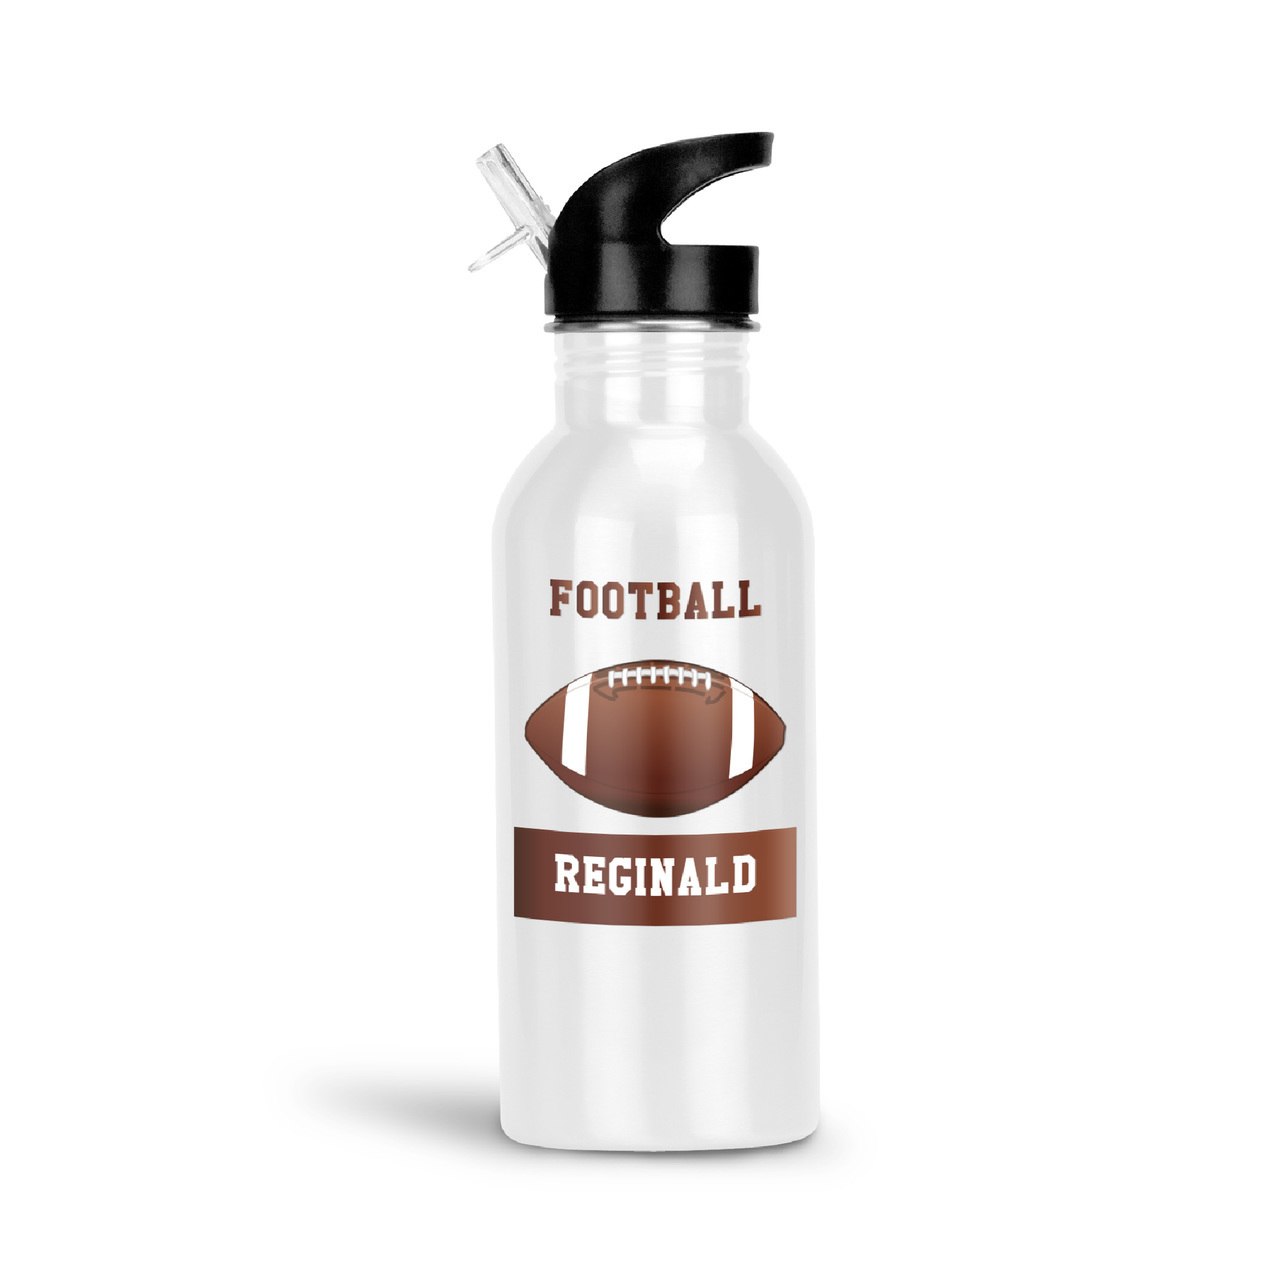 Choose From A Wide Array of the Football Fan Gifts | by Sports Footballblog  | Medium